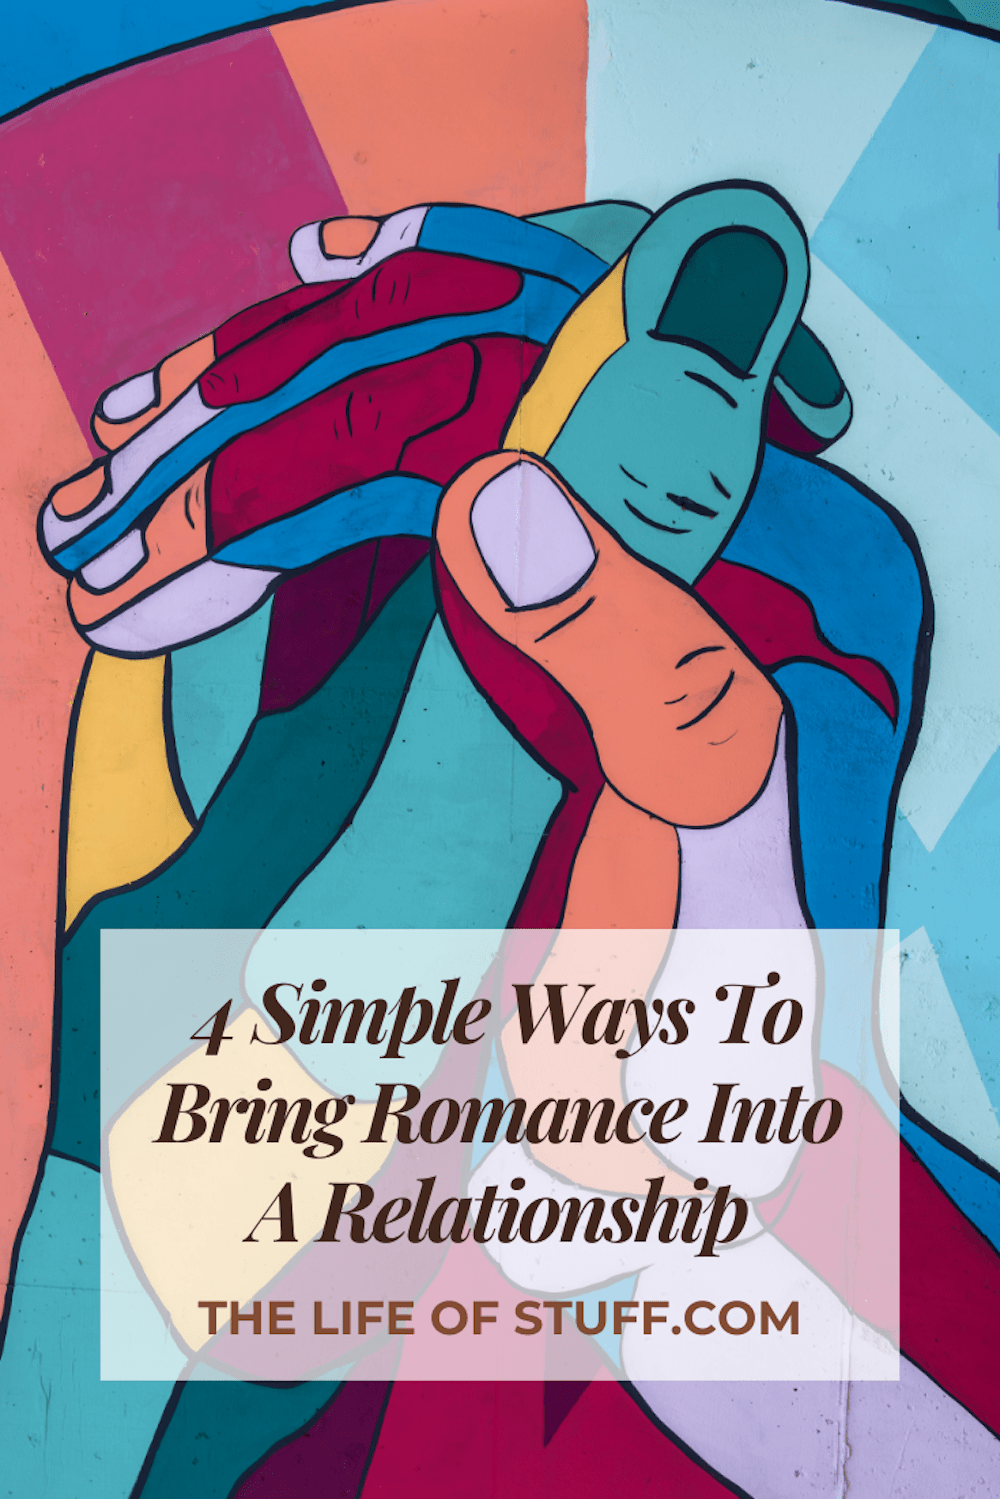 4 Simple Ways To Bring Romance Into A Relationship - The Life of Stuff